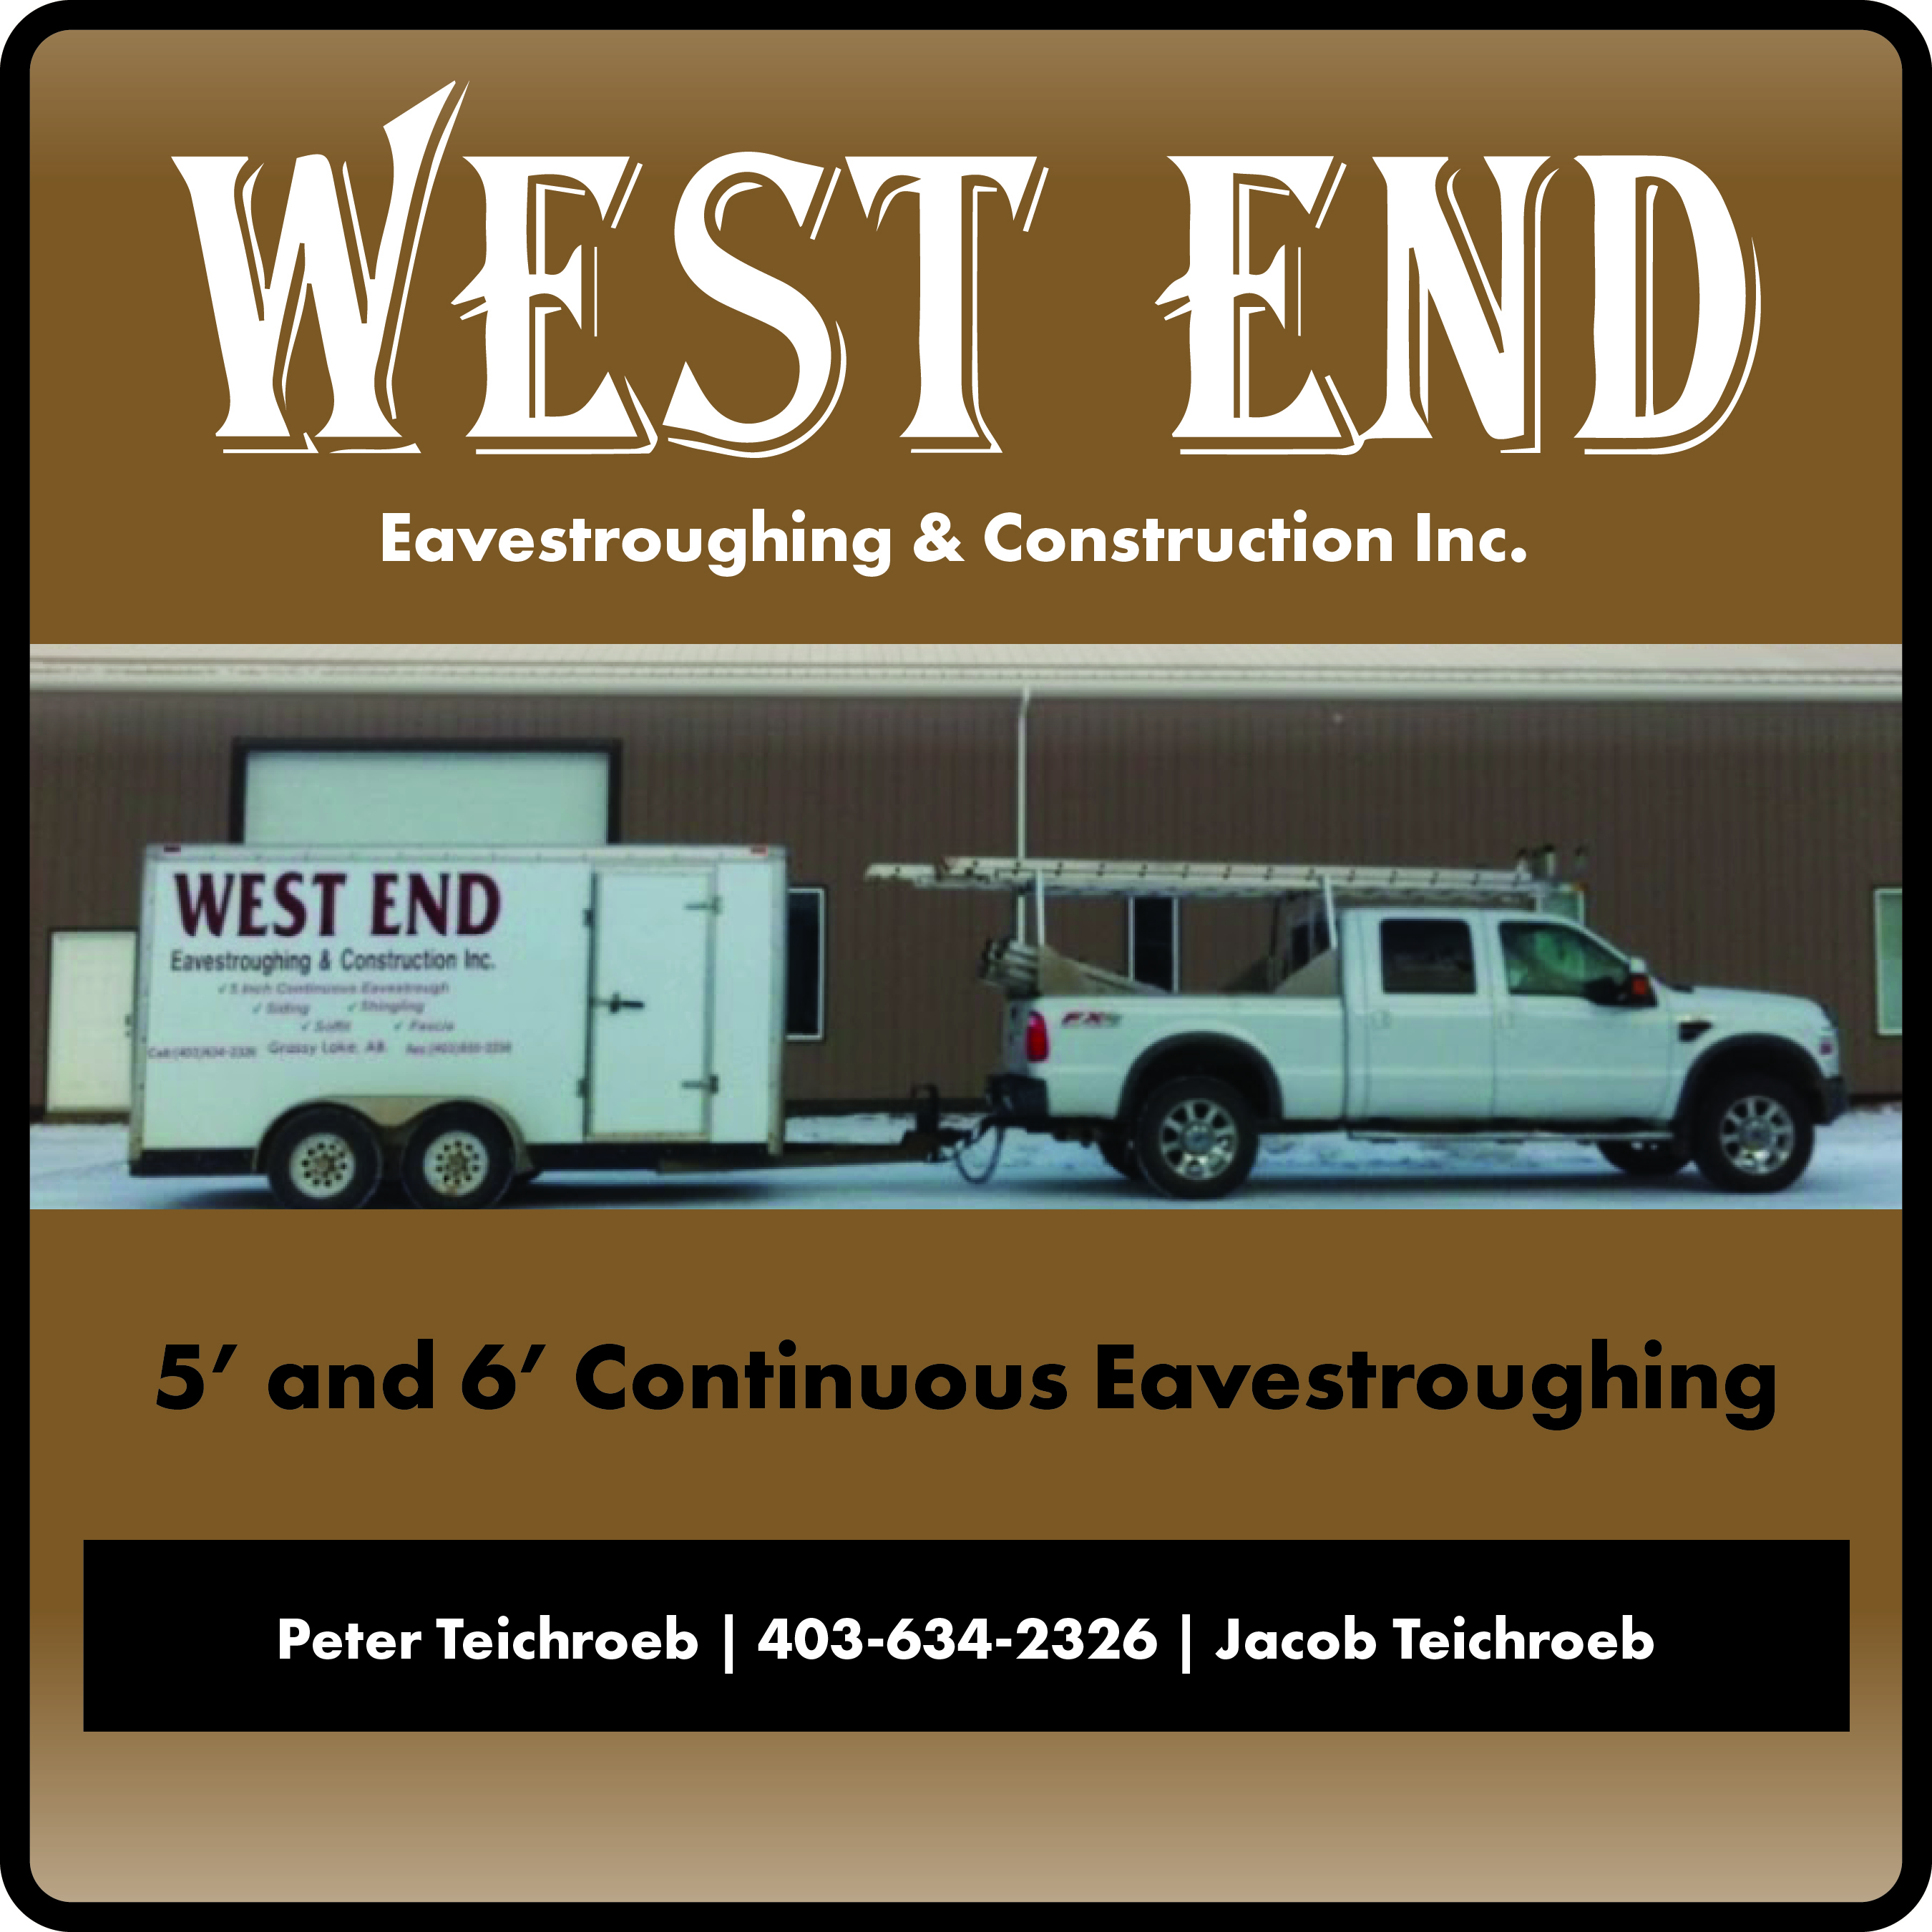 West End Eavestroughing & Construction Inc